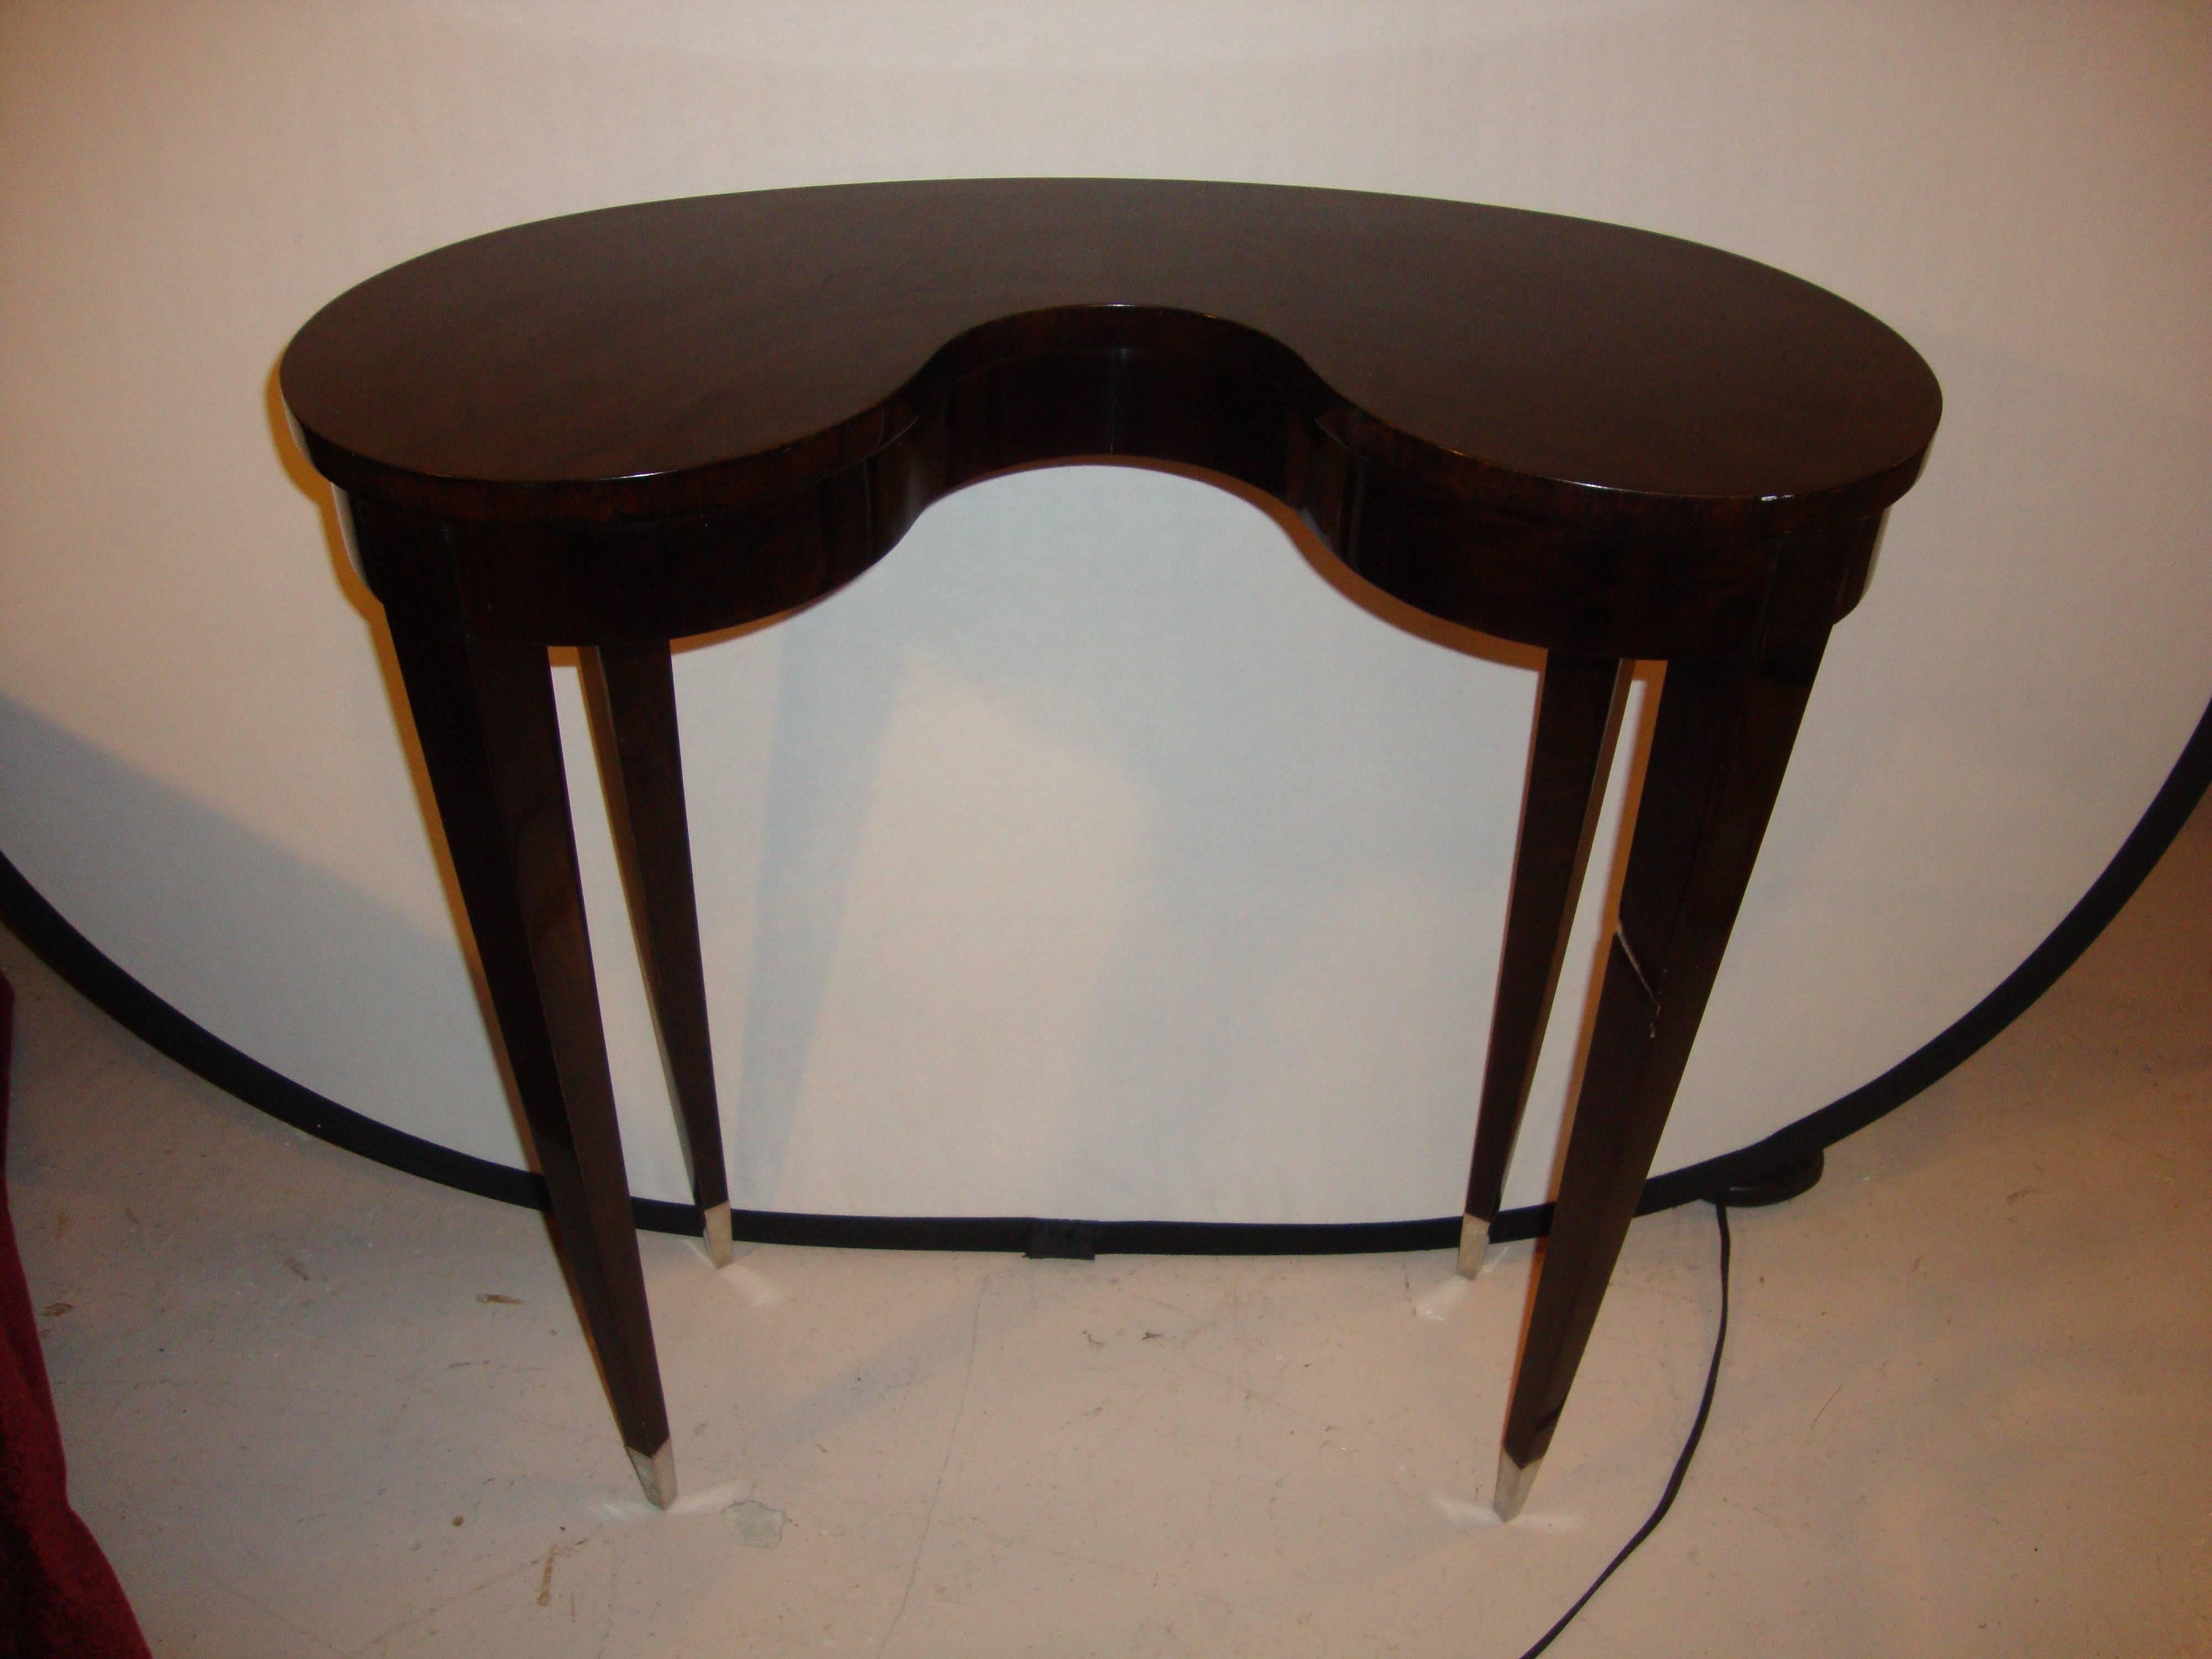 Jonathan Charles kidney shaped end table. Sheen black eucalyptus and stainless steel caps to the feet. Belgravia coll.